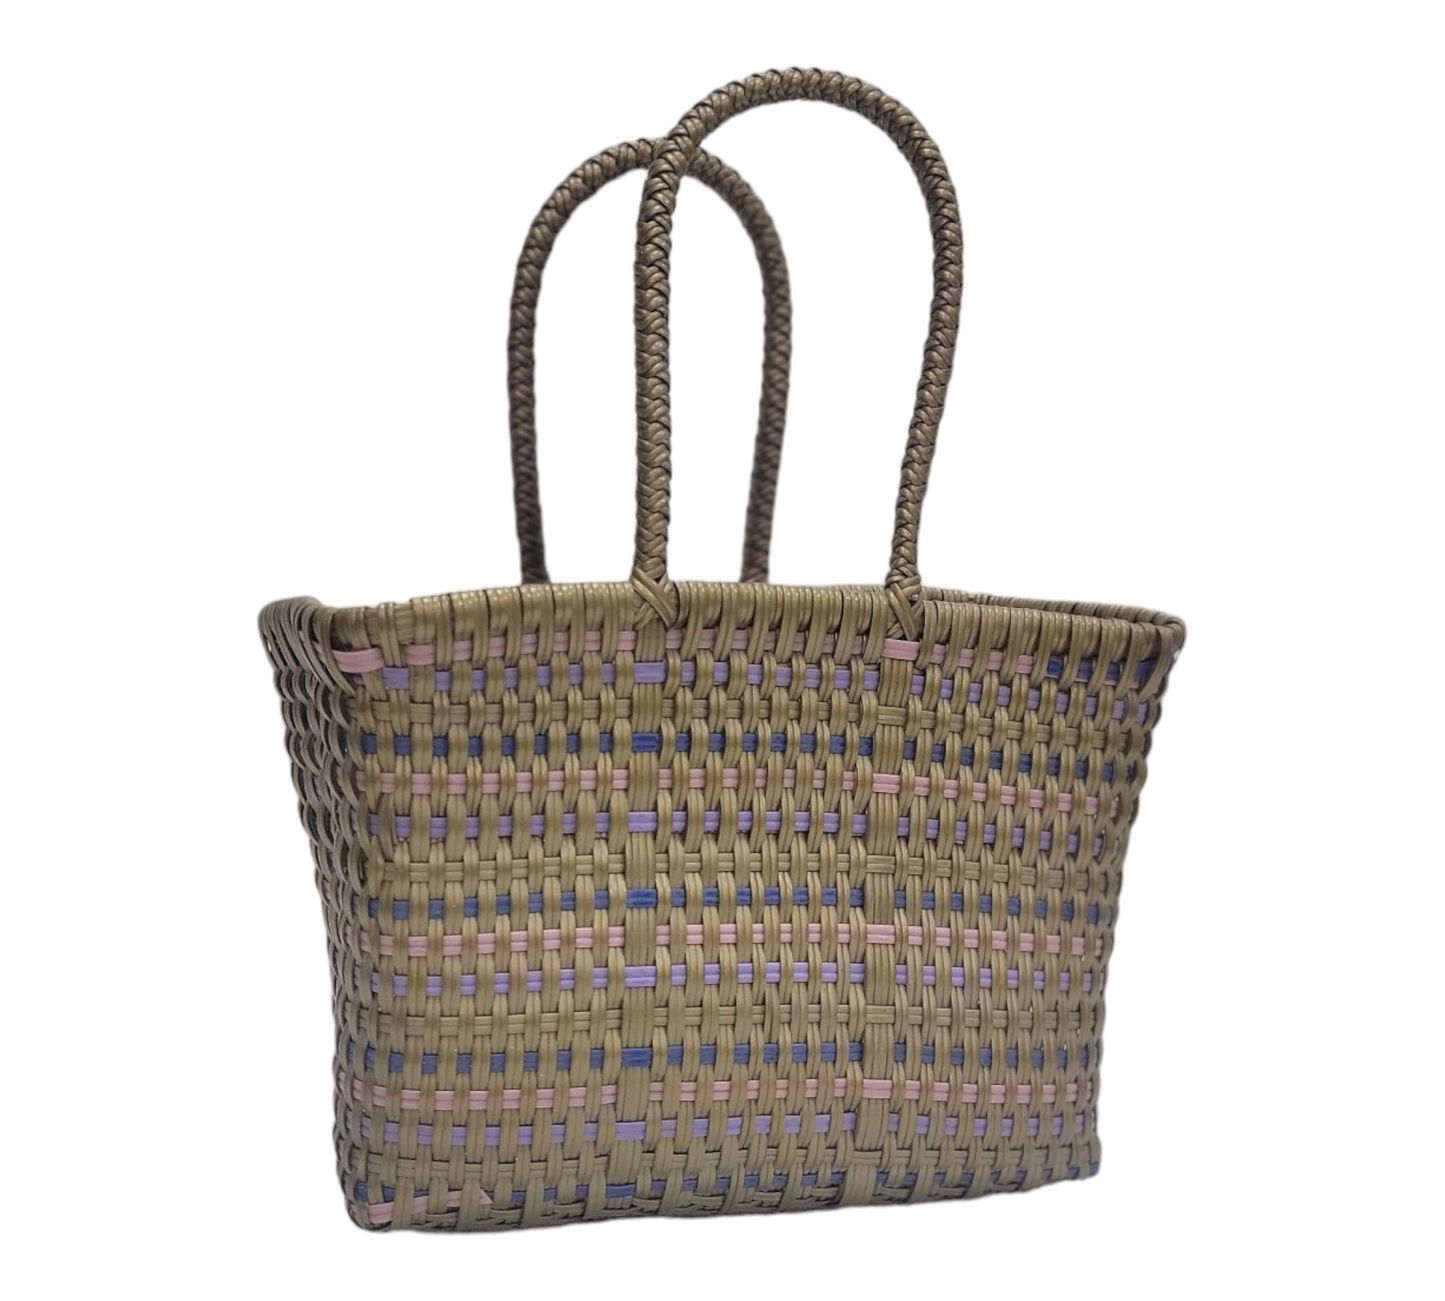 Girly Gold Mini Tote | Handwoven recycled bags